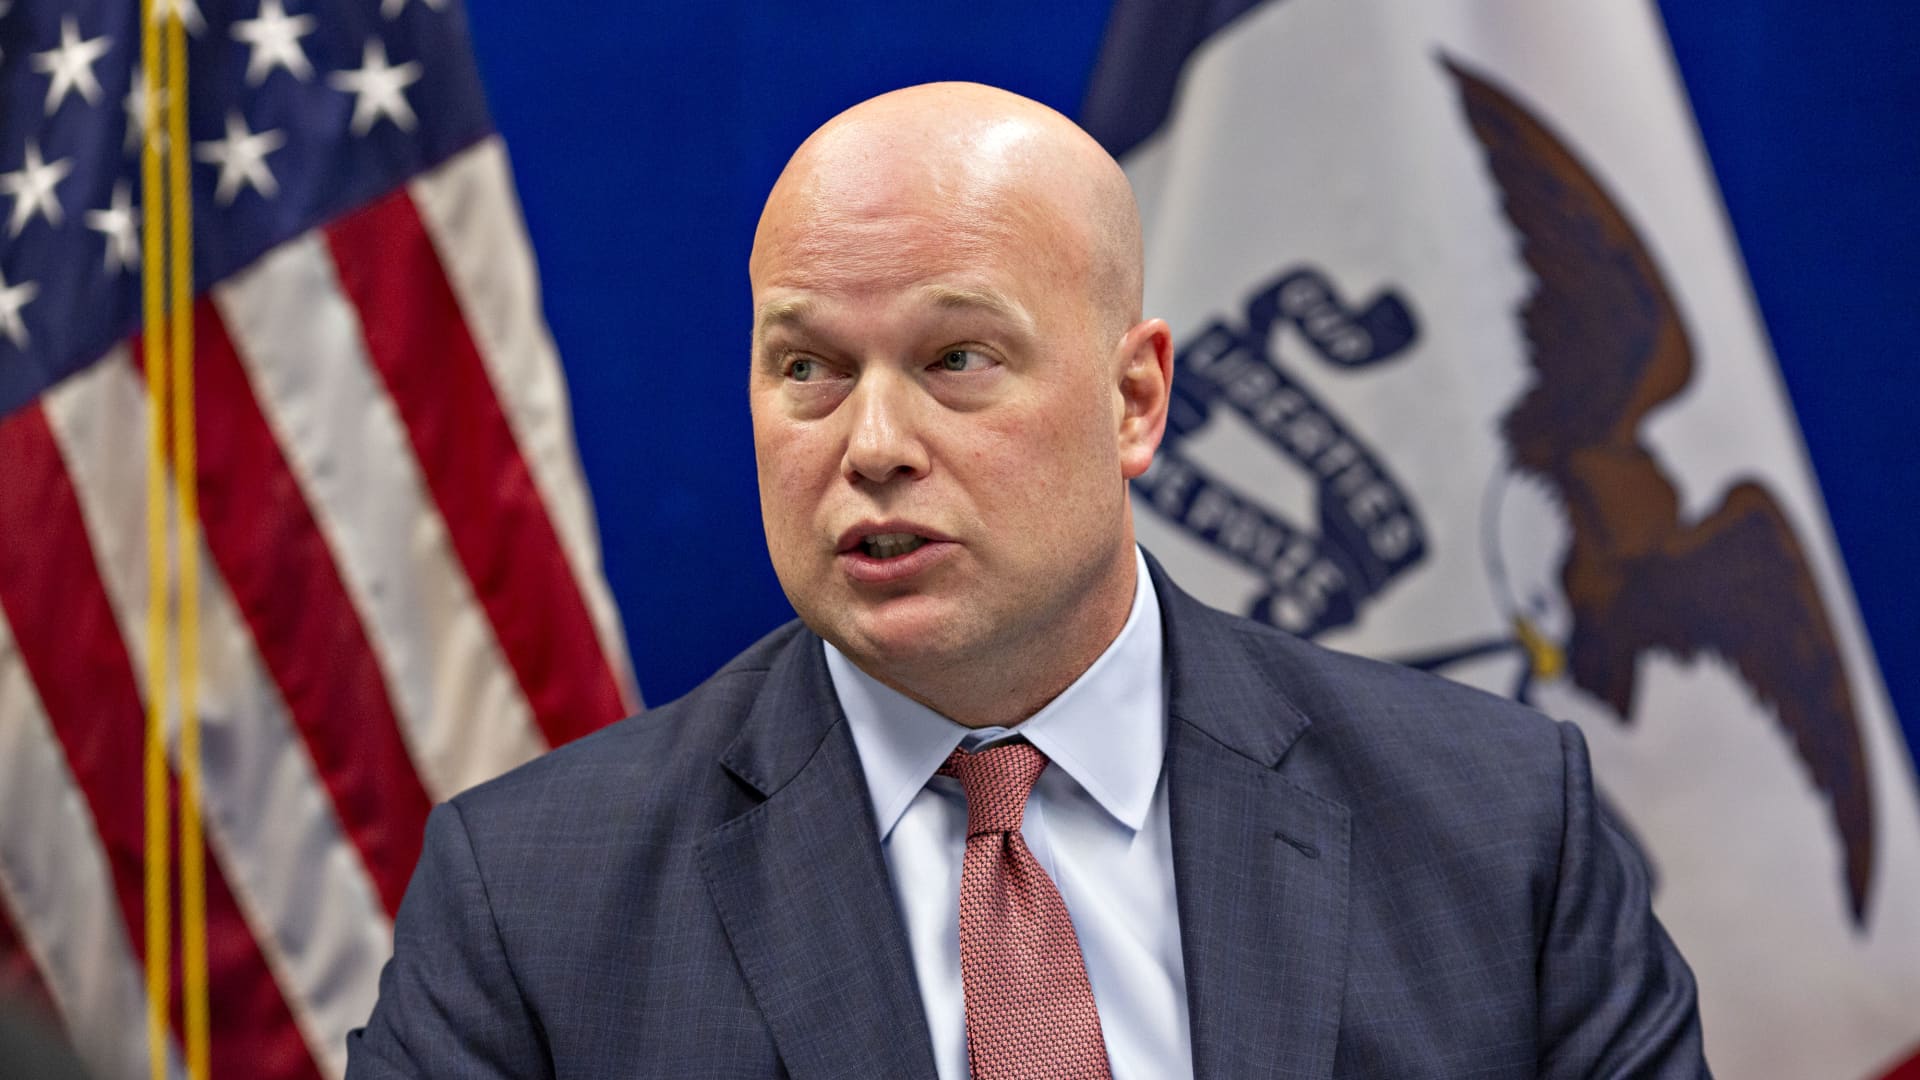 DOJ cleared Matthew Whitaker to be acting attorney general